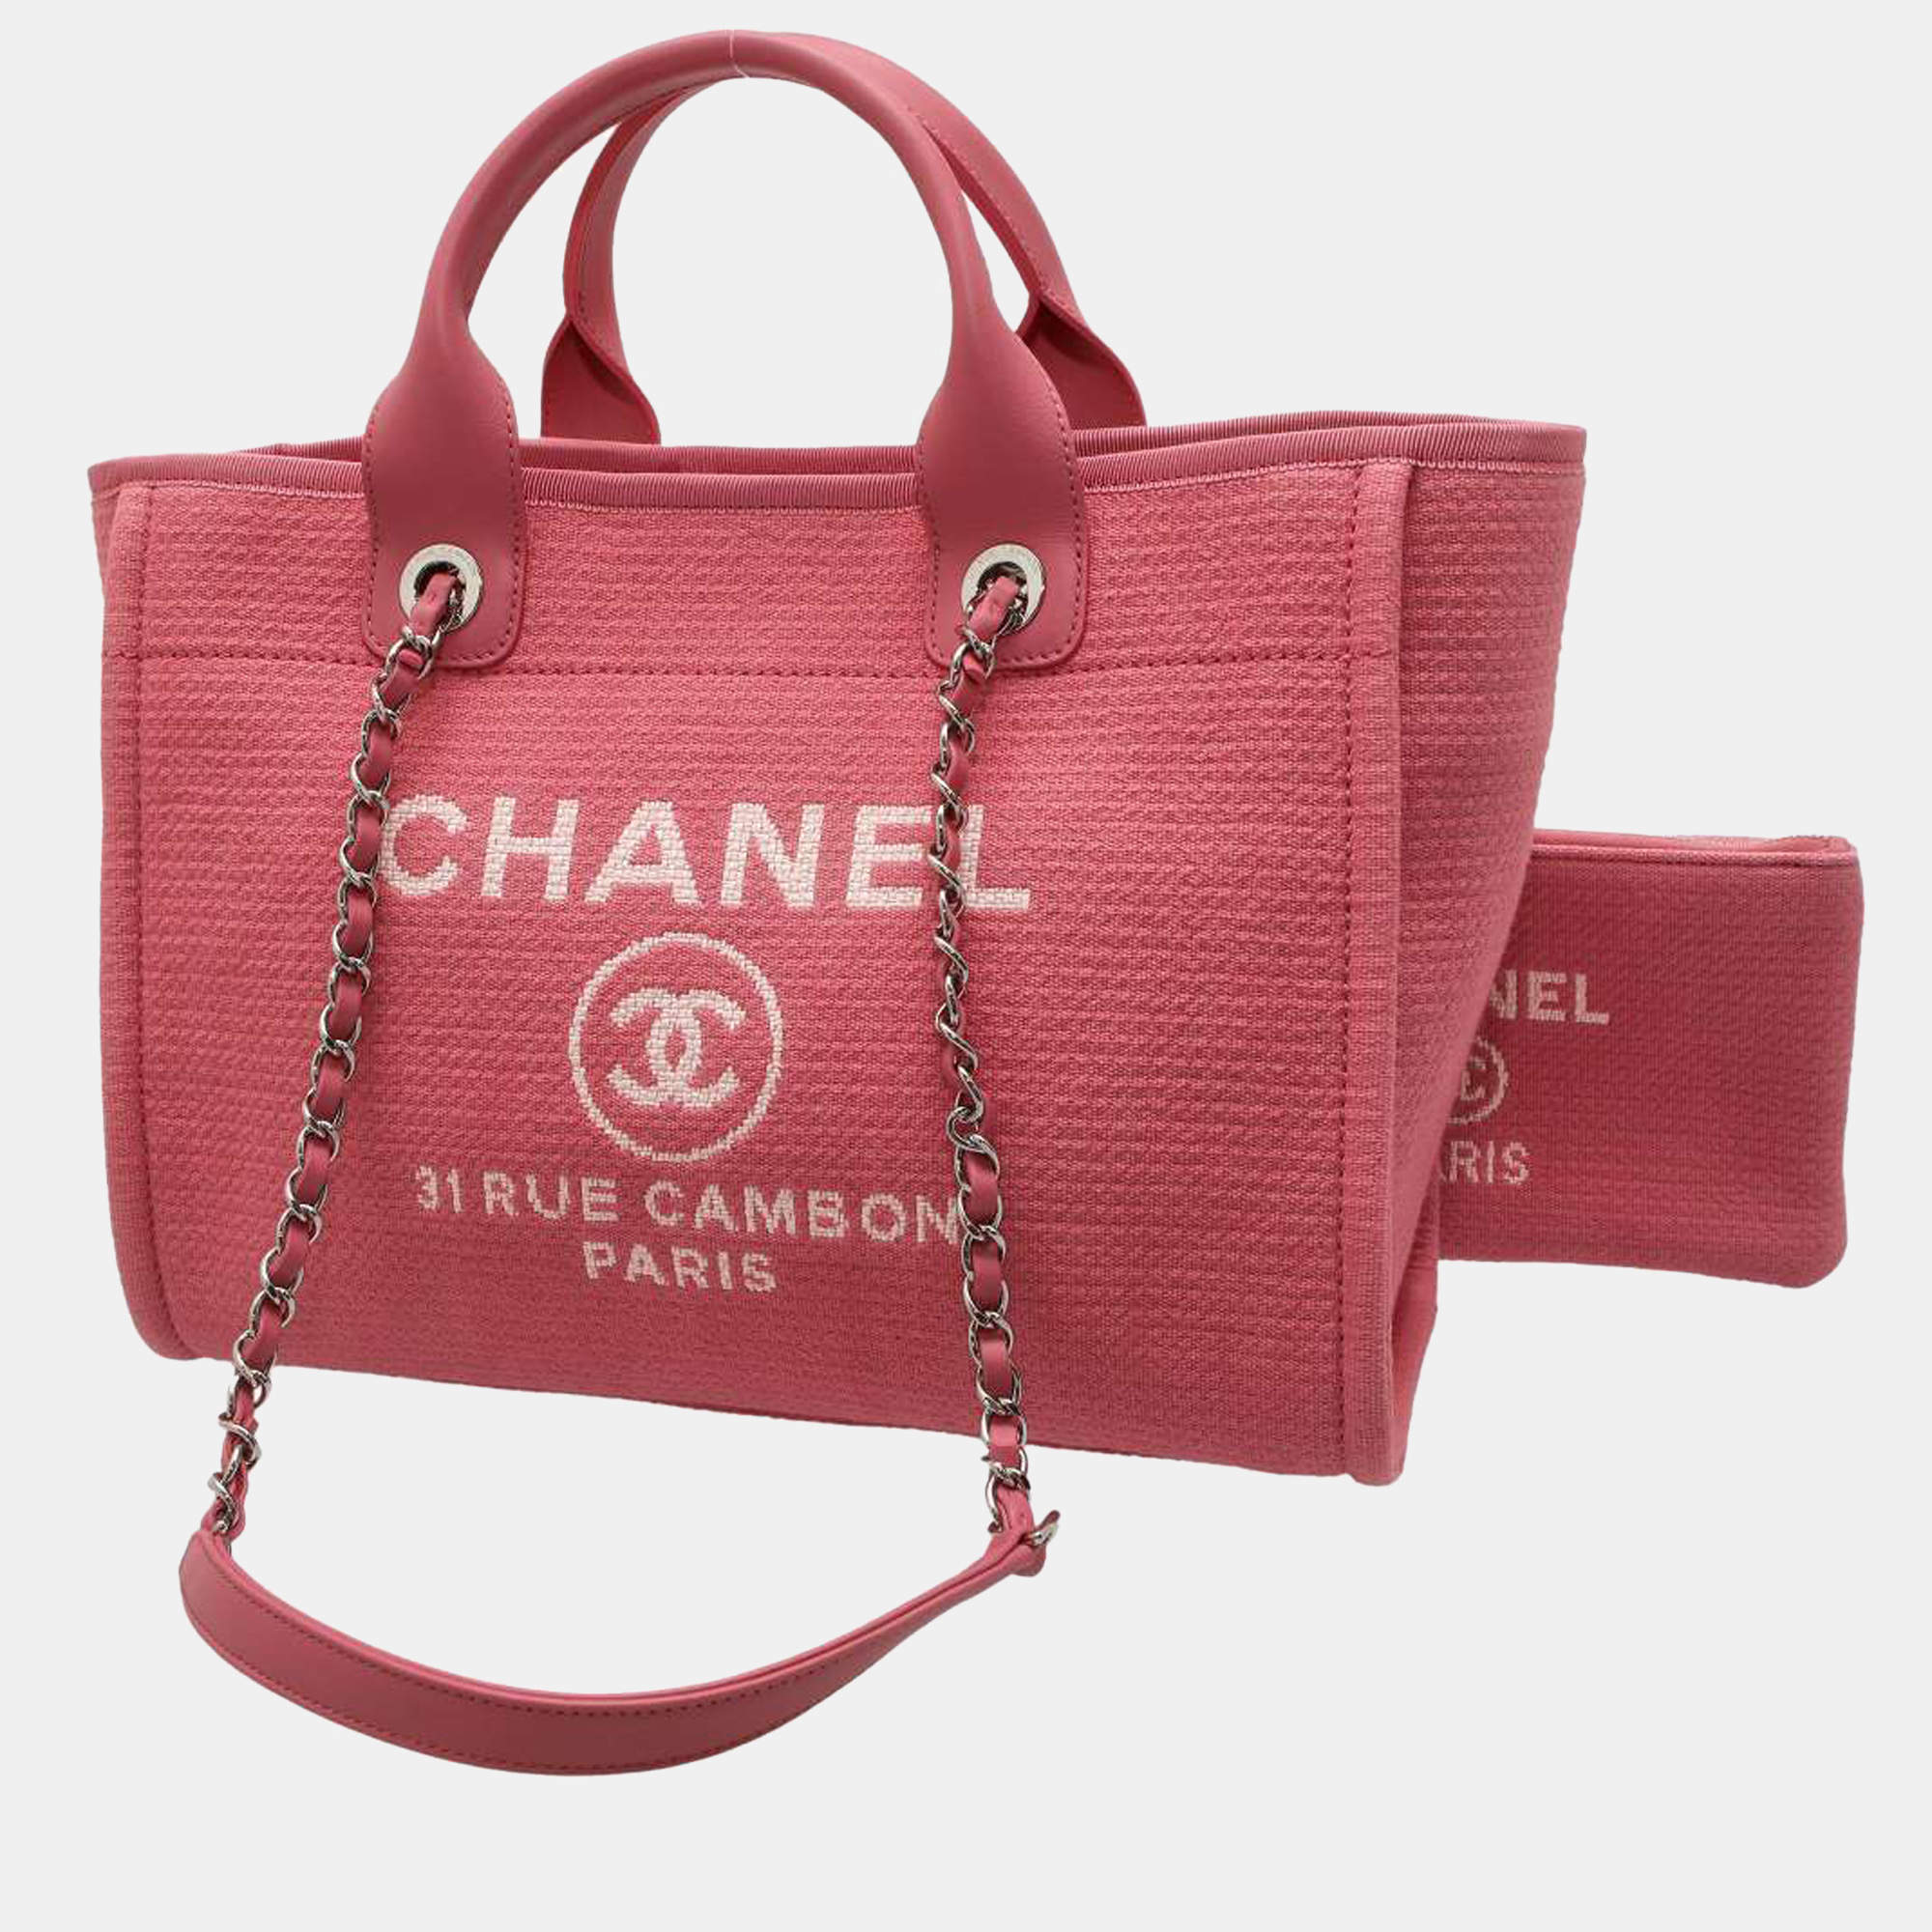 Chanel Pink Canvas Deauville Small Tote Bag Chanel | TLC